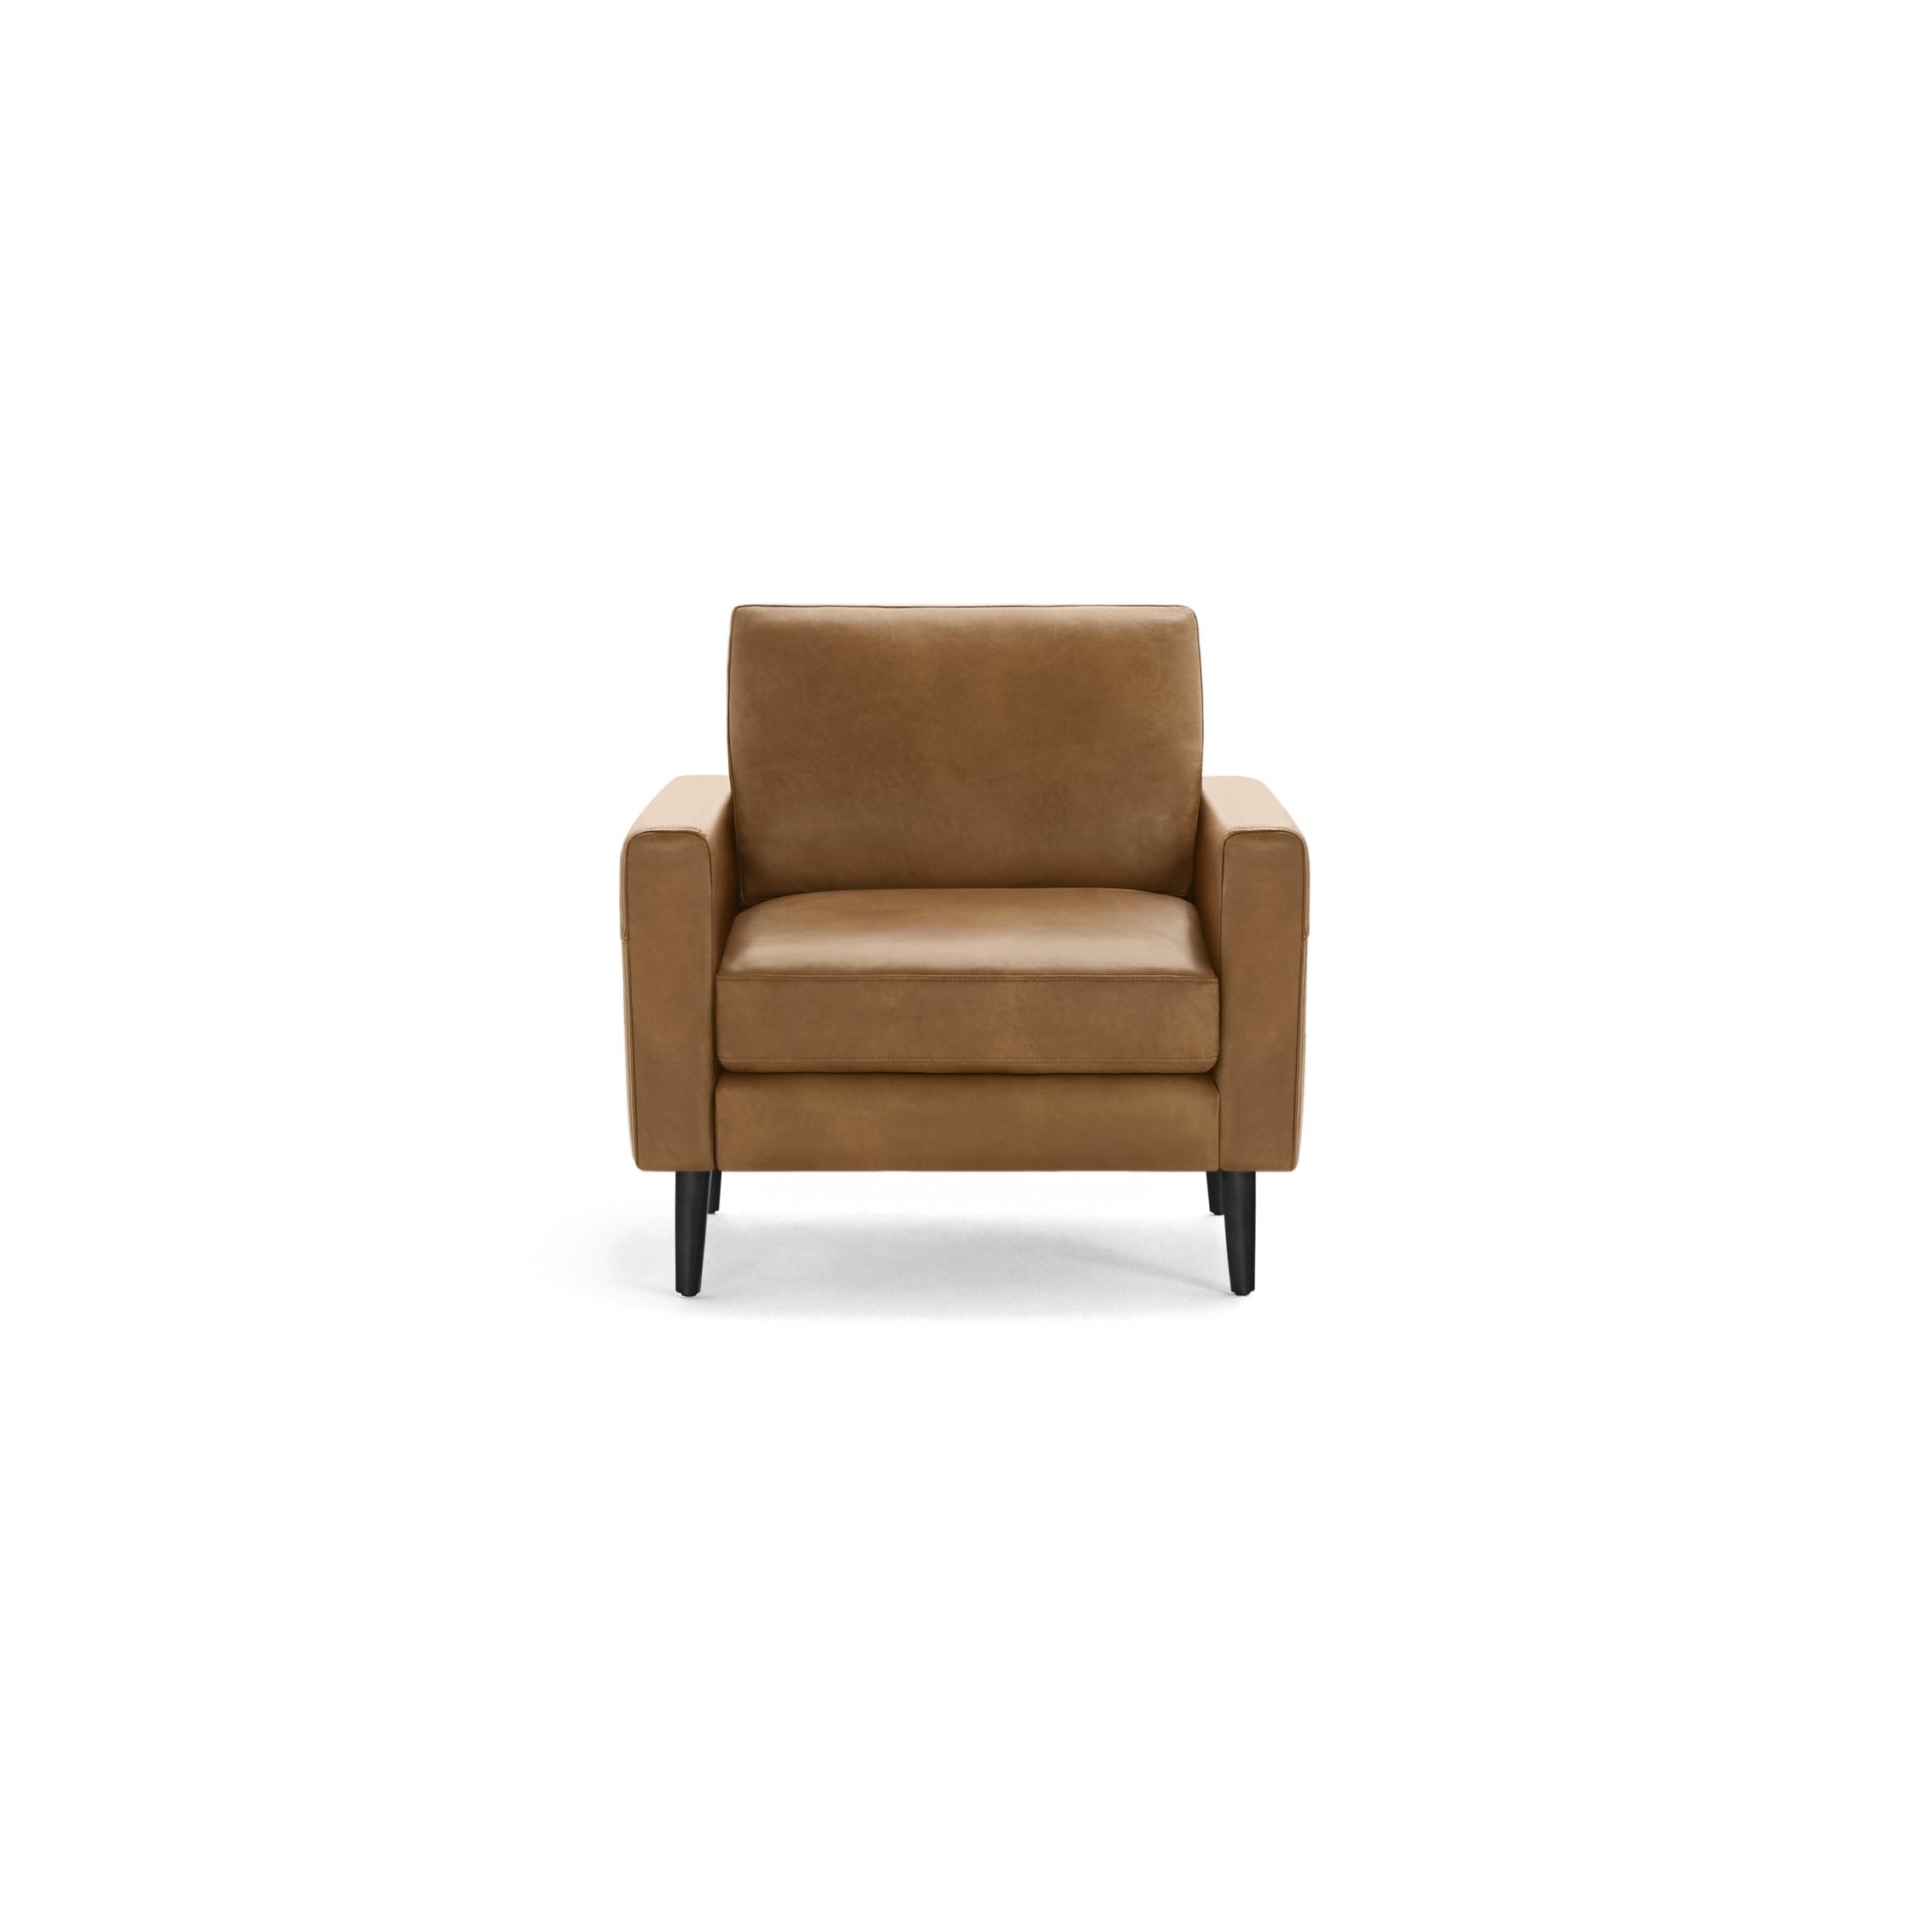 The Block Nomad Leather Armchair in Camel, Ebony Legs